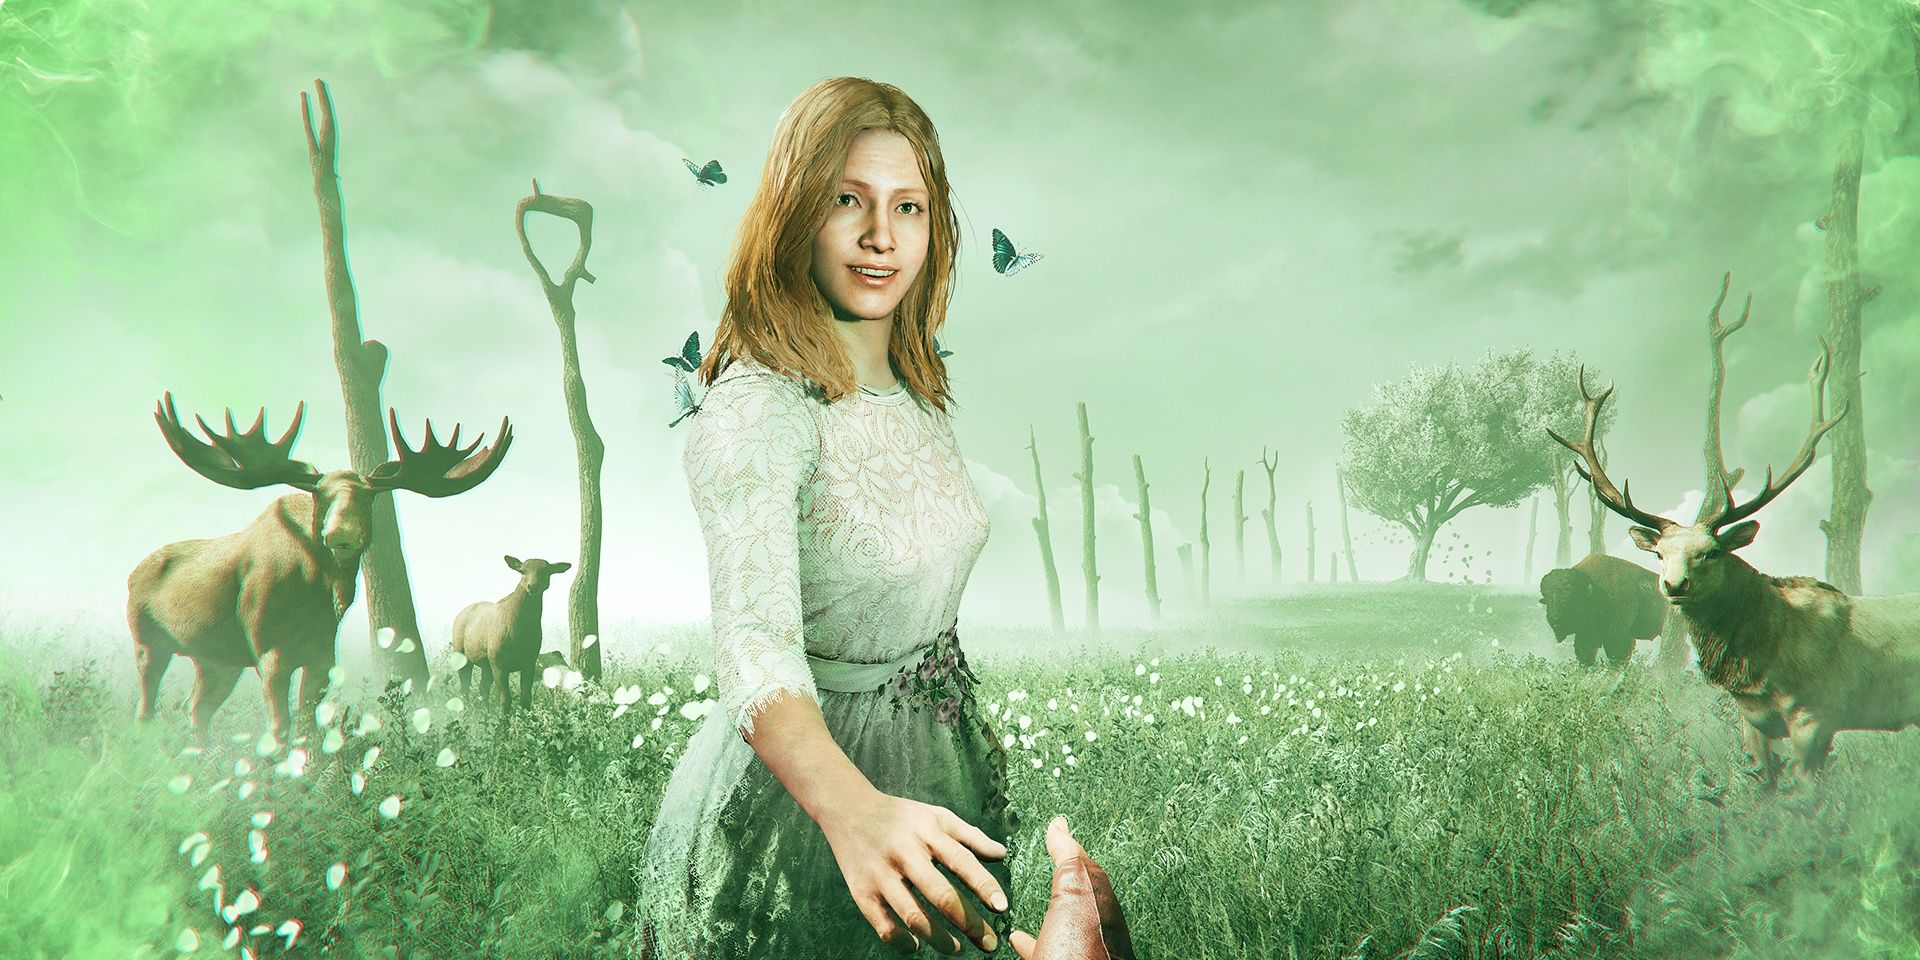 Far Cry 5's Faith Seed leading player through hallucinogenic field with animals